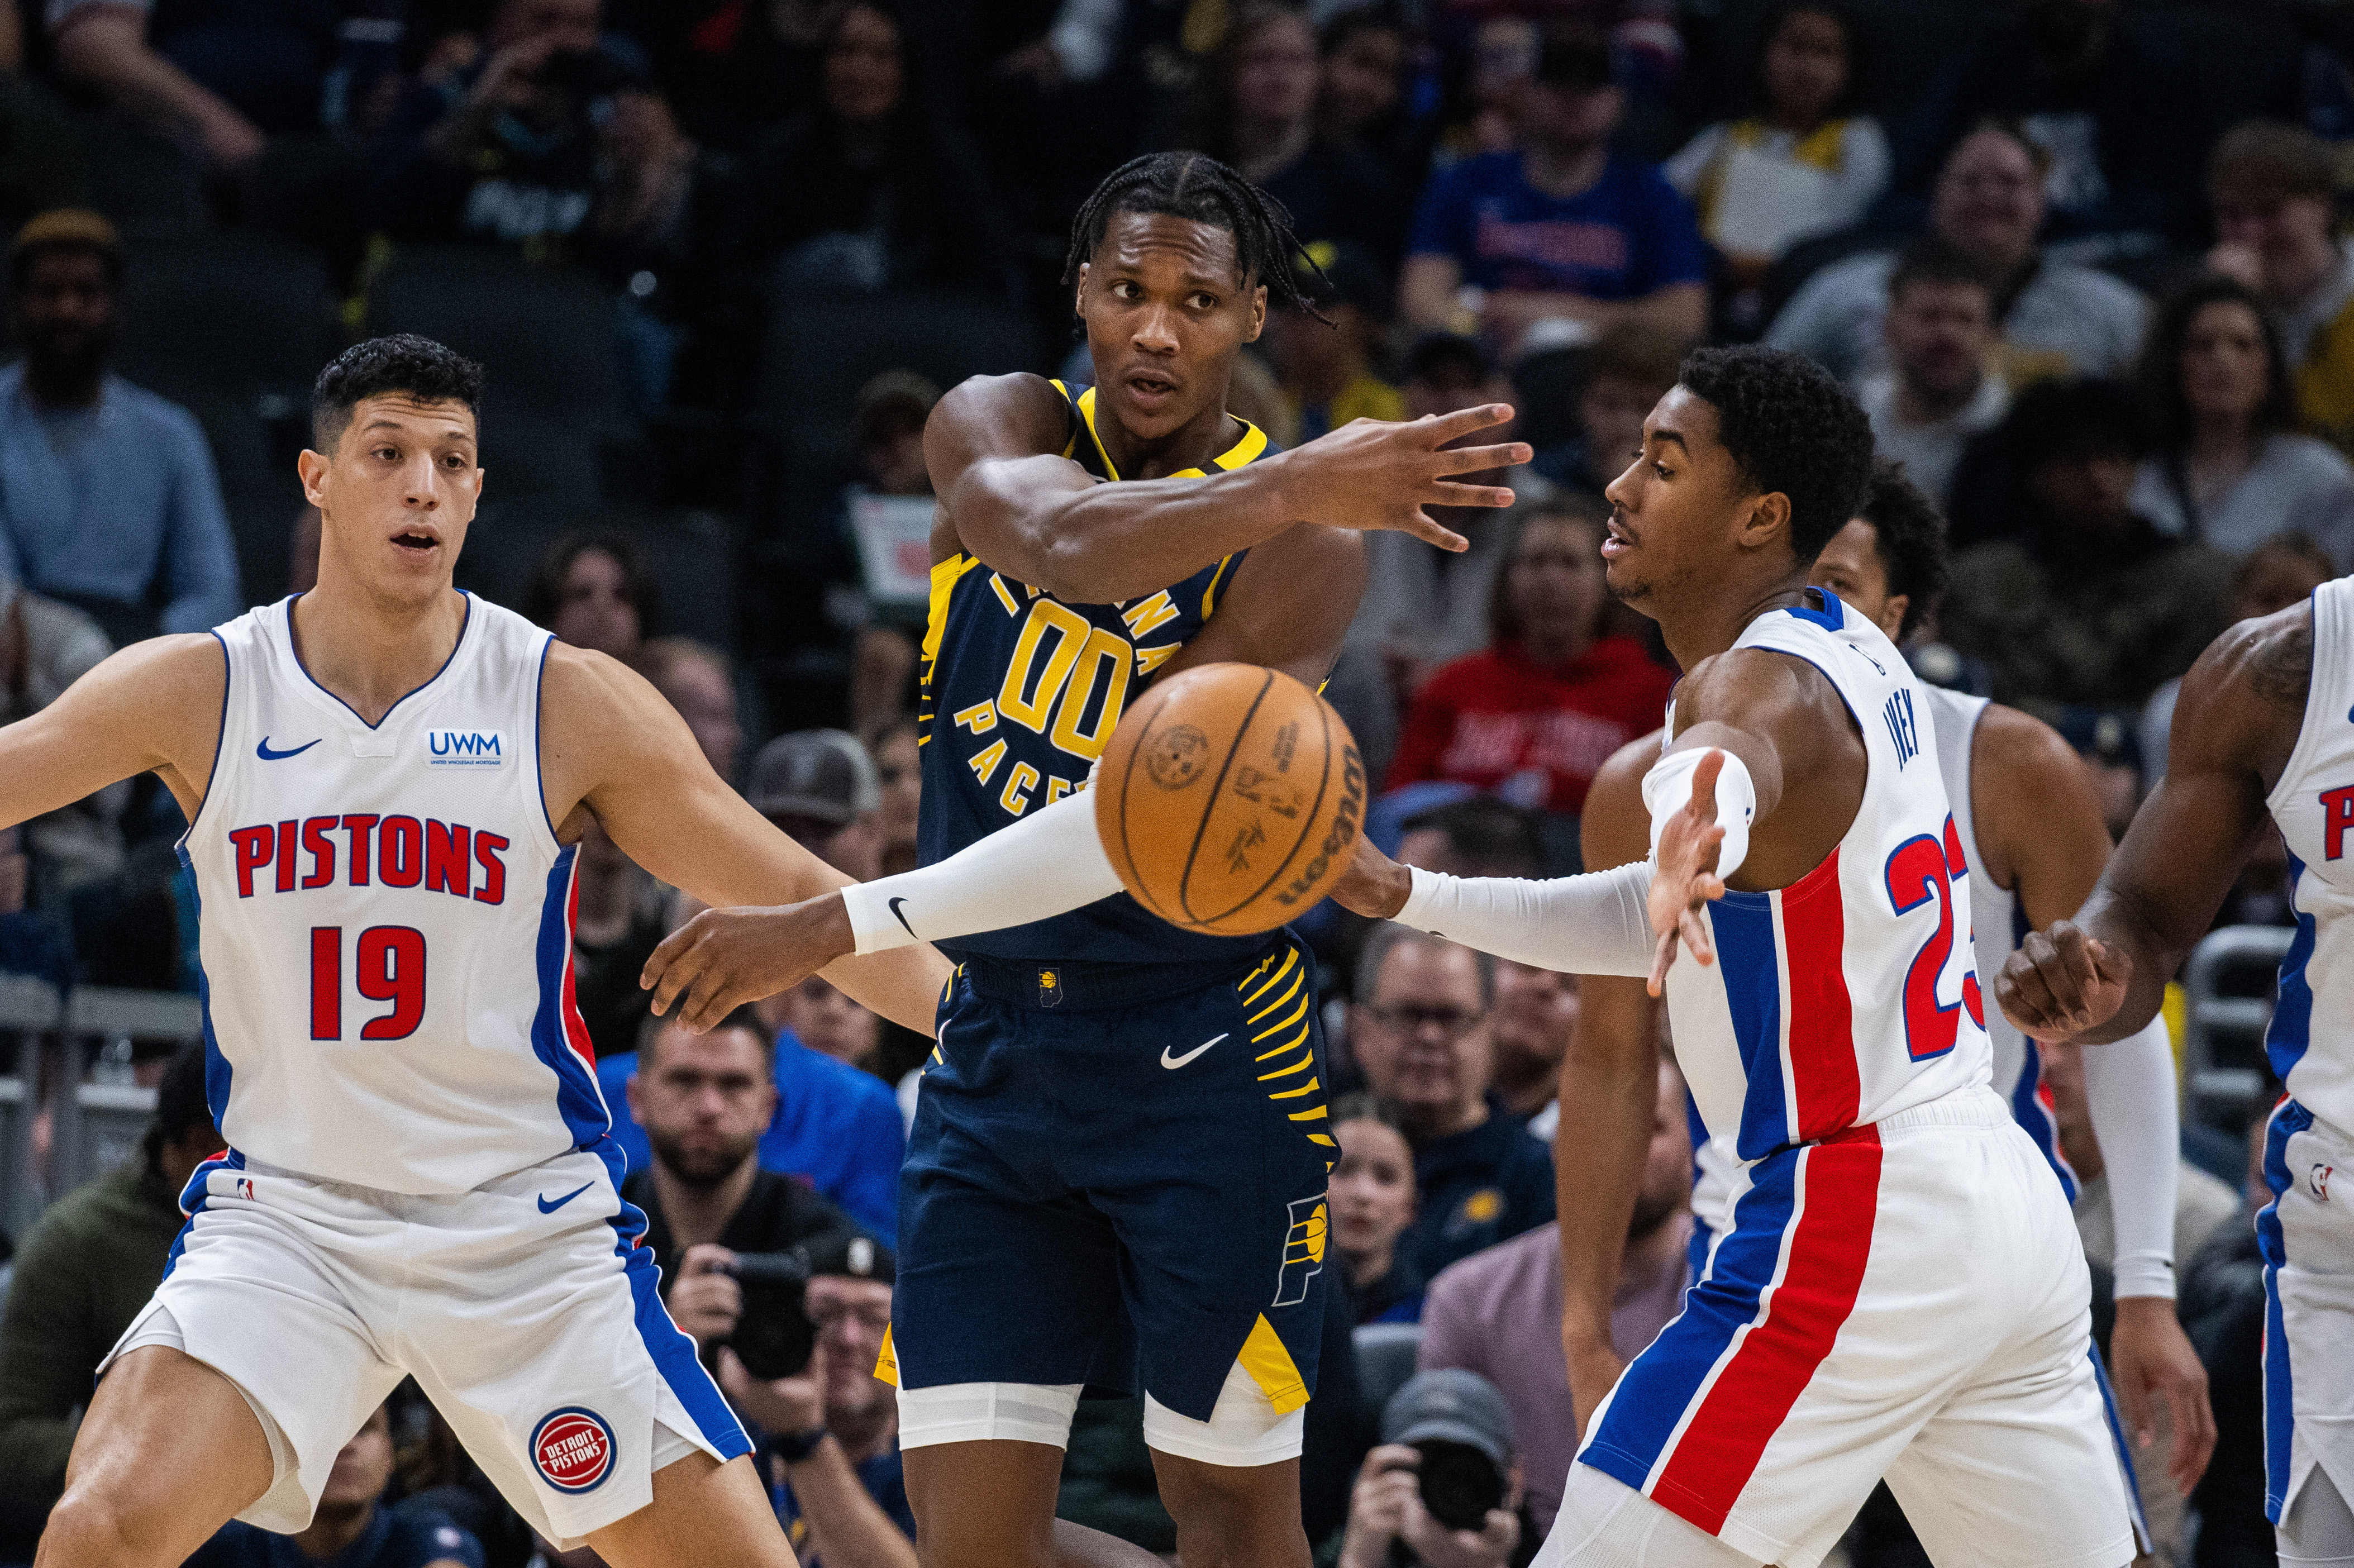 Detroit Pistons Make Roster Move Ahead of Matchup vs. Pacers - All Pistons